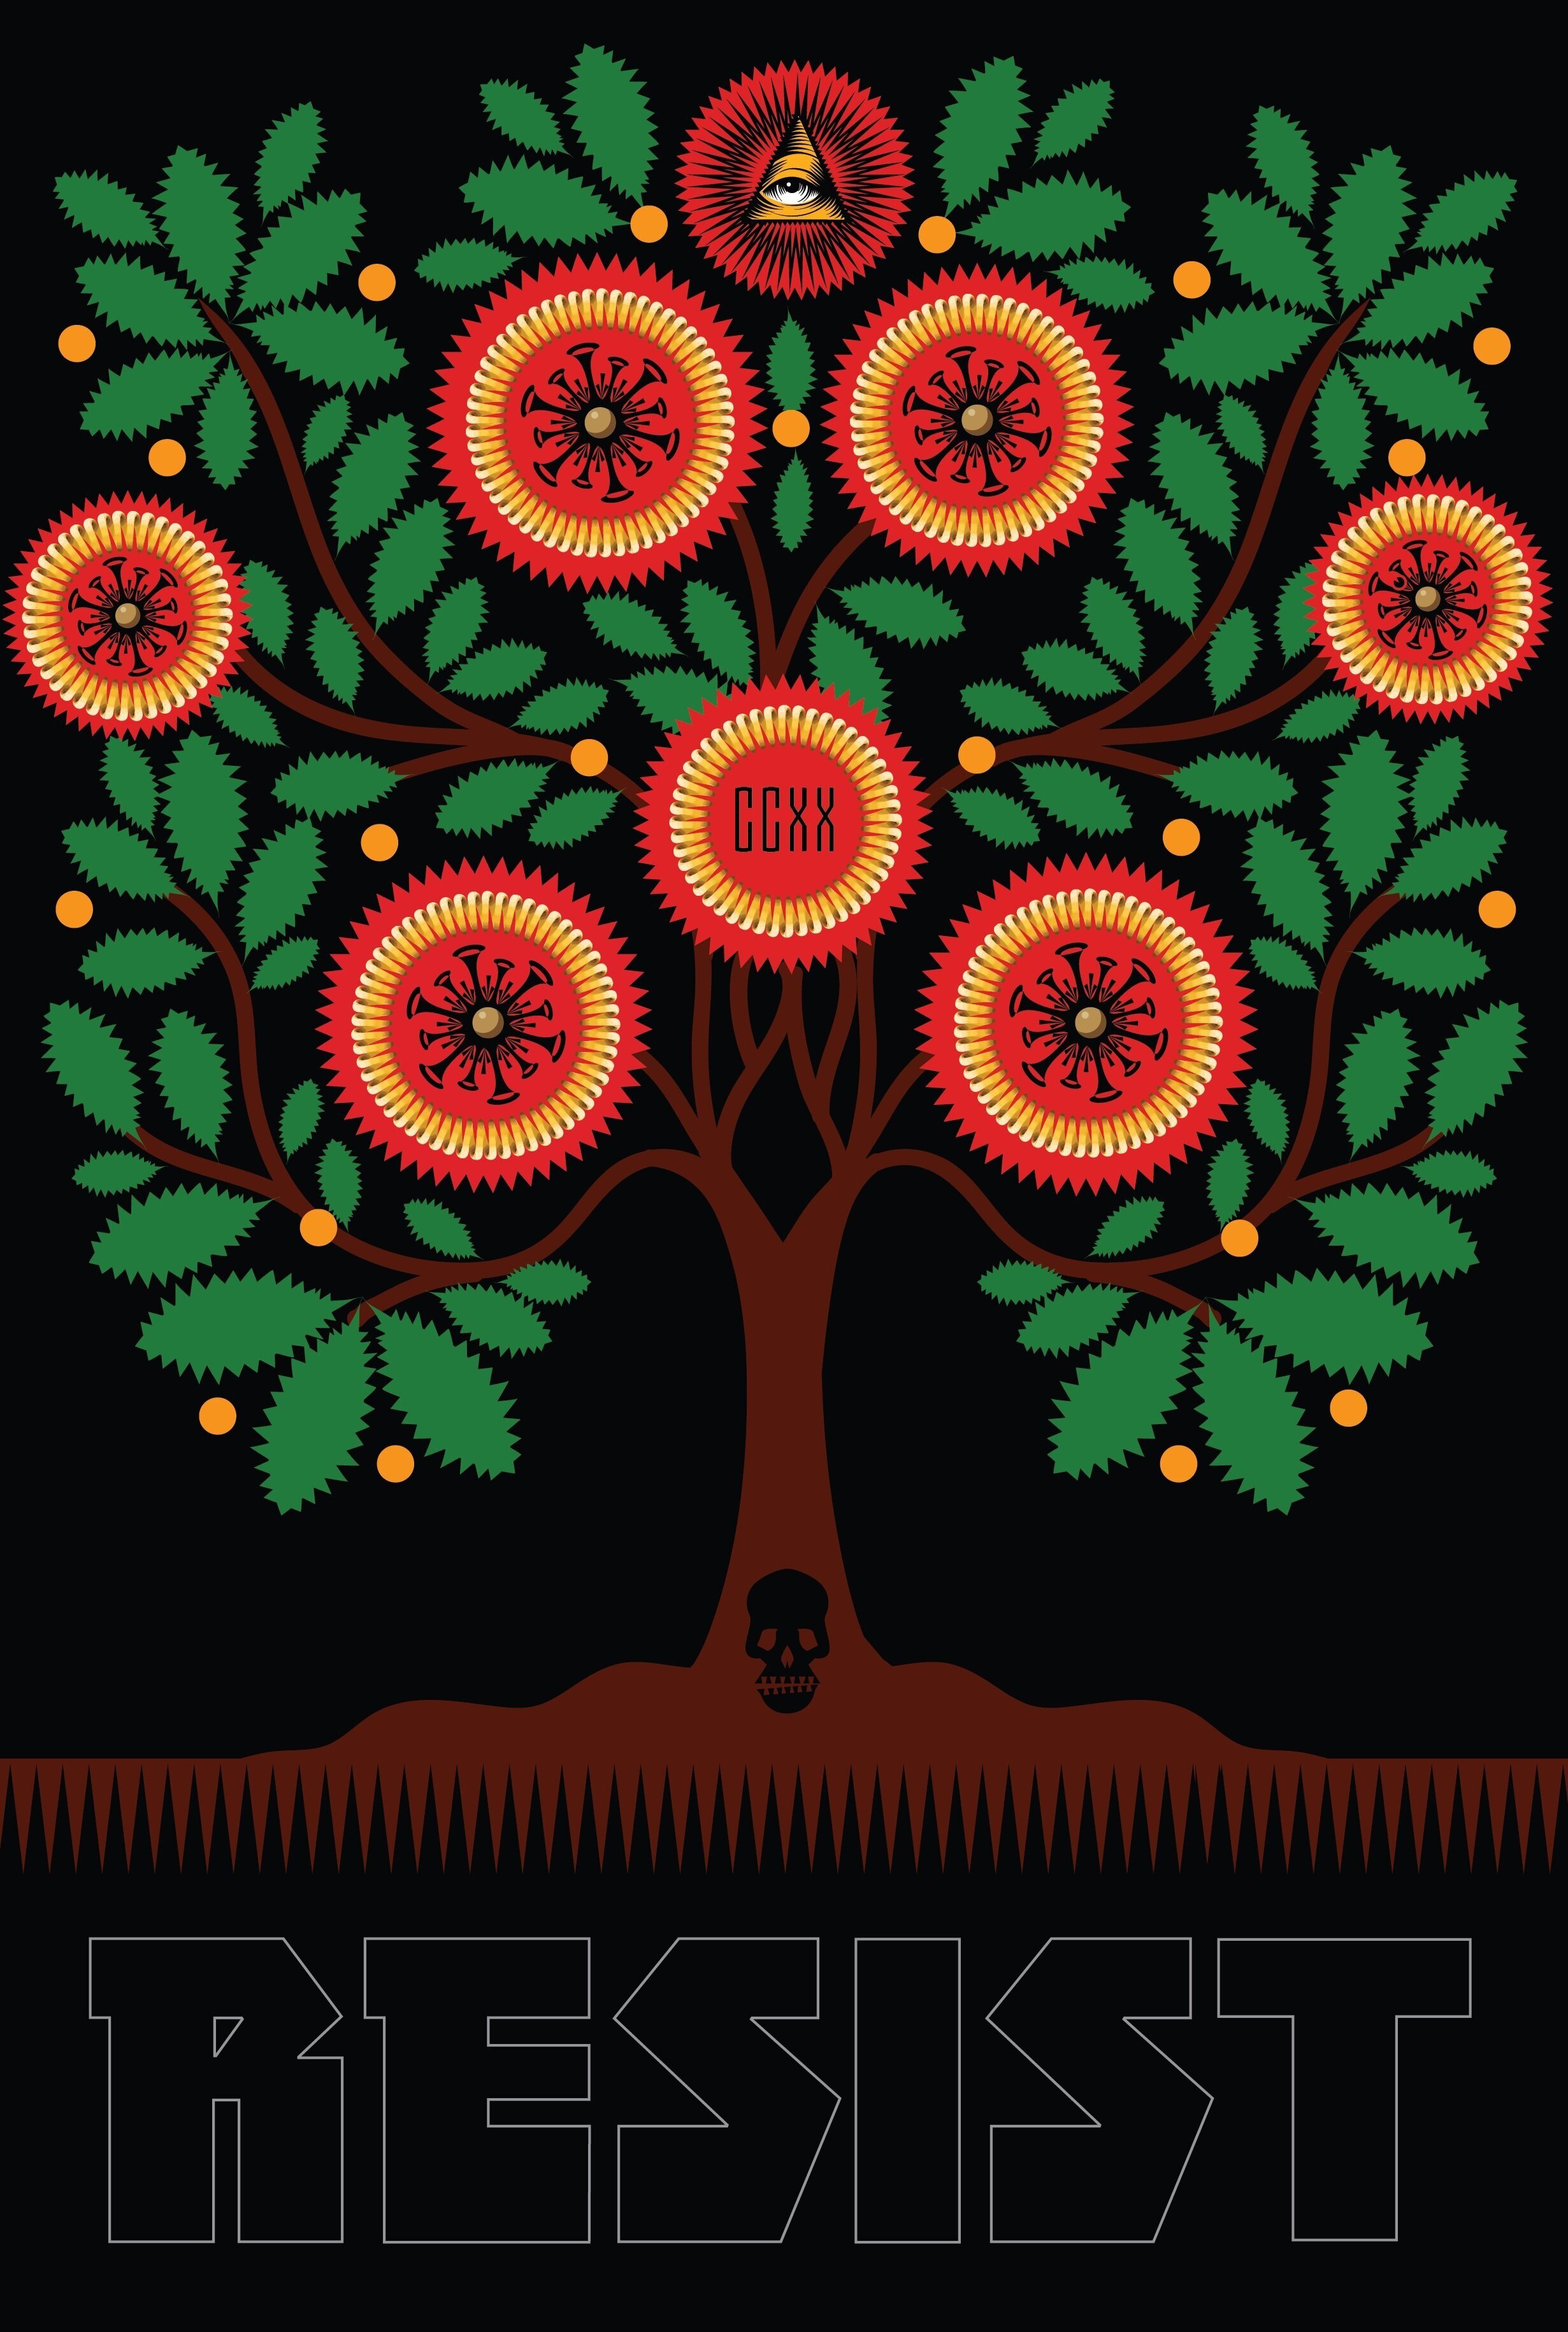  Resist 2020#12  In Memoriam: 220,000 lost souls to the Novel Corona Virus 19. We mourn our losses  Q. Cassetti 10.13.2020  Inspired by the Shaker Tree of Life (ref:  https://www.incollect.com/.../a-cutwork-tree-of-life-in... )    